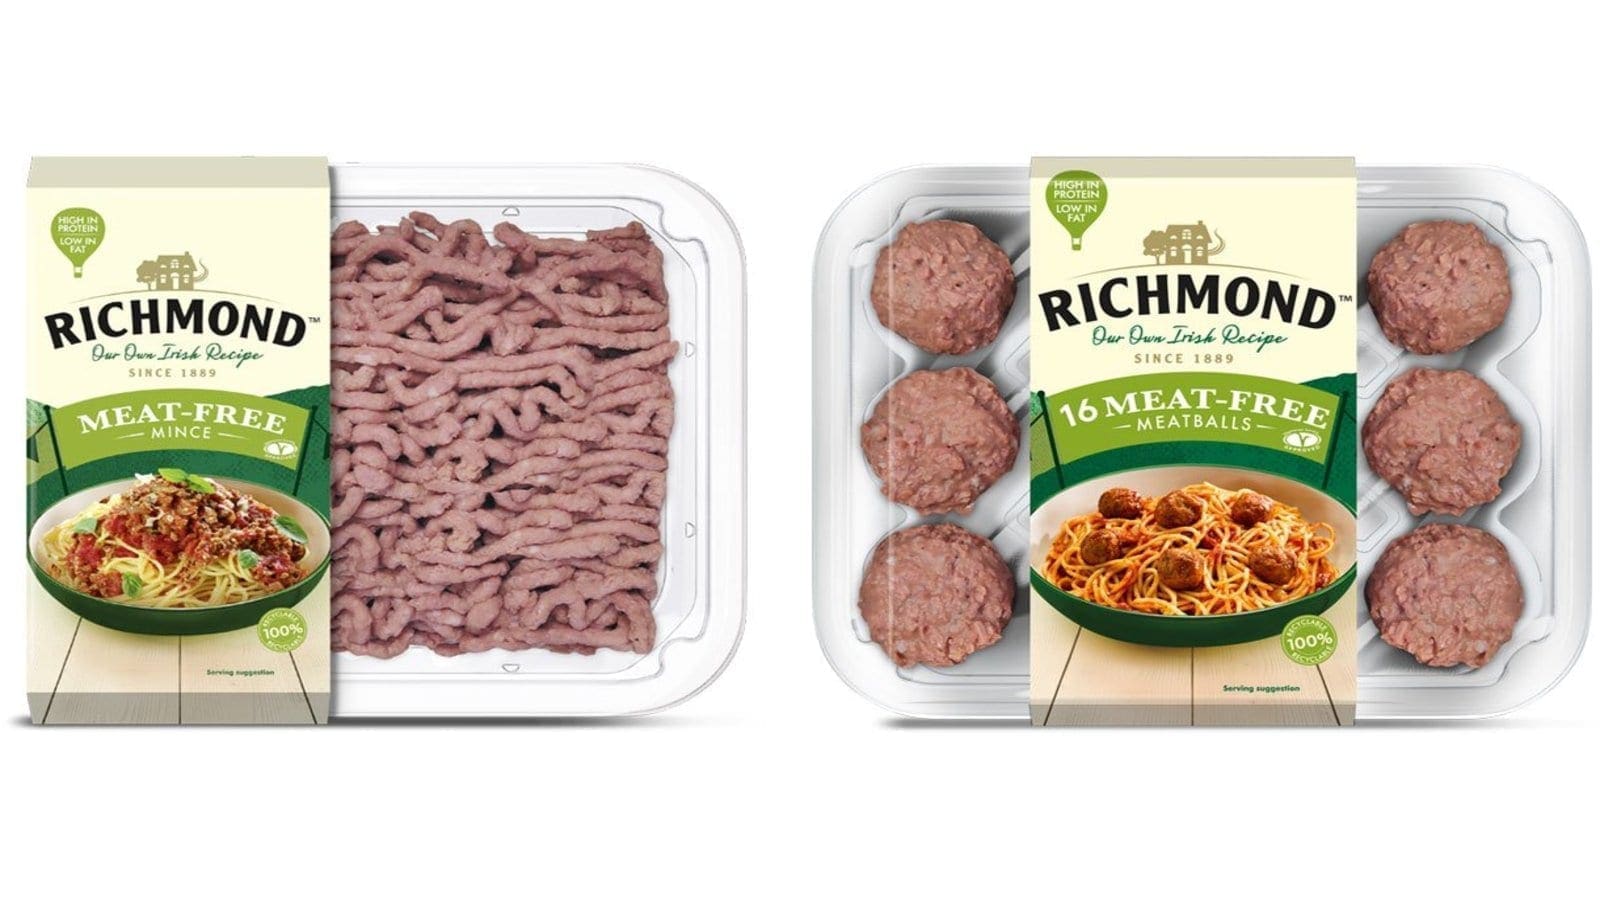 Kerry’s Richmond brand launches meat-free meatballs in UK as demand for alternative protein soars